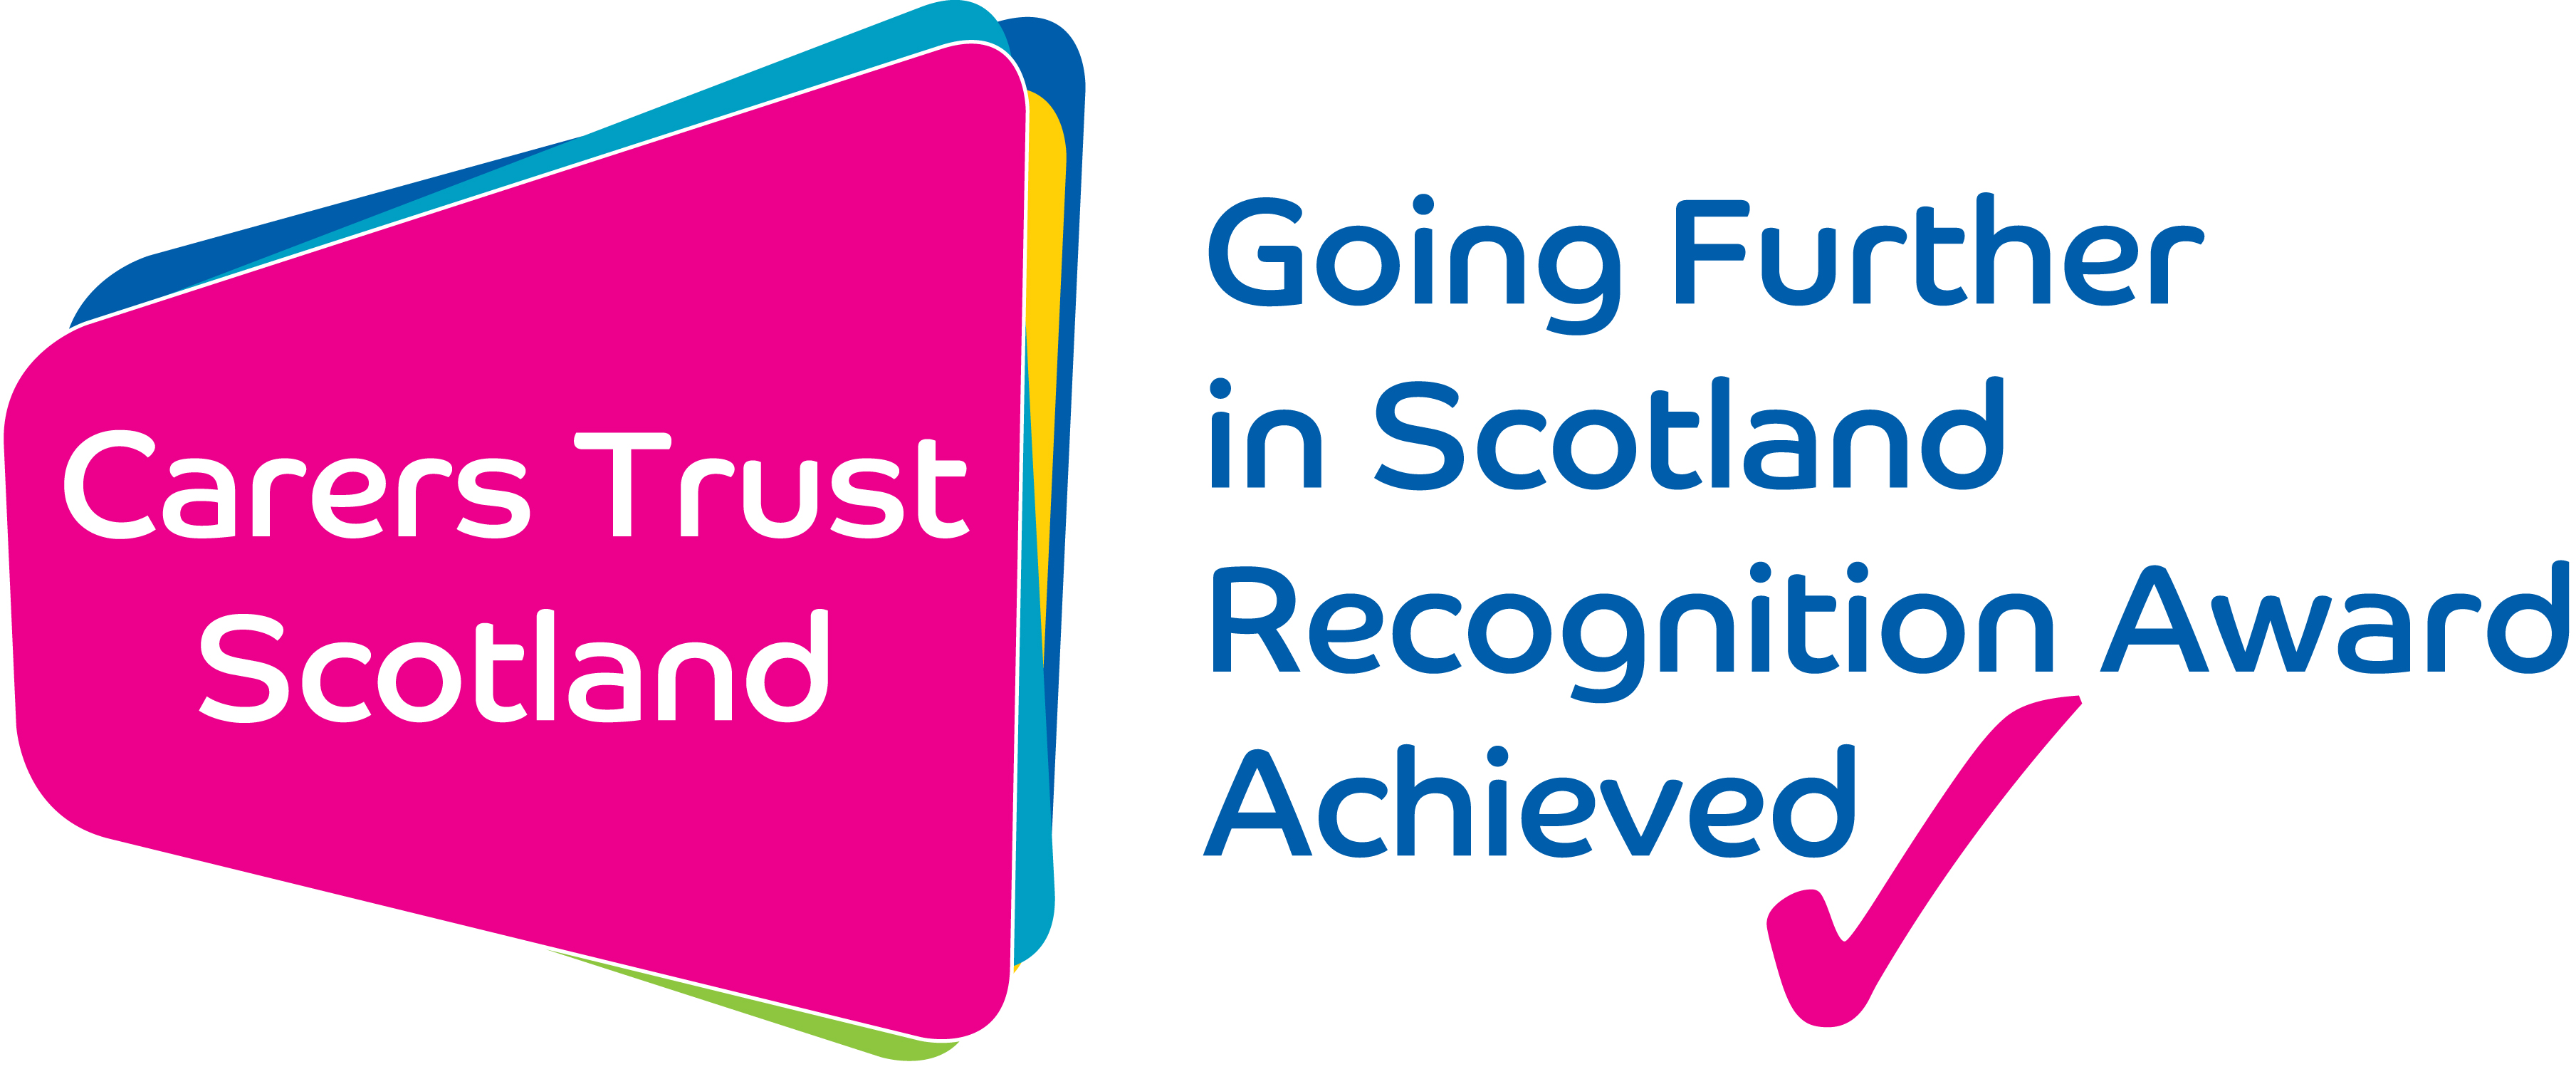 Carers Trust Scotland Going Further in Scotland Recognition Award Logo